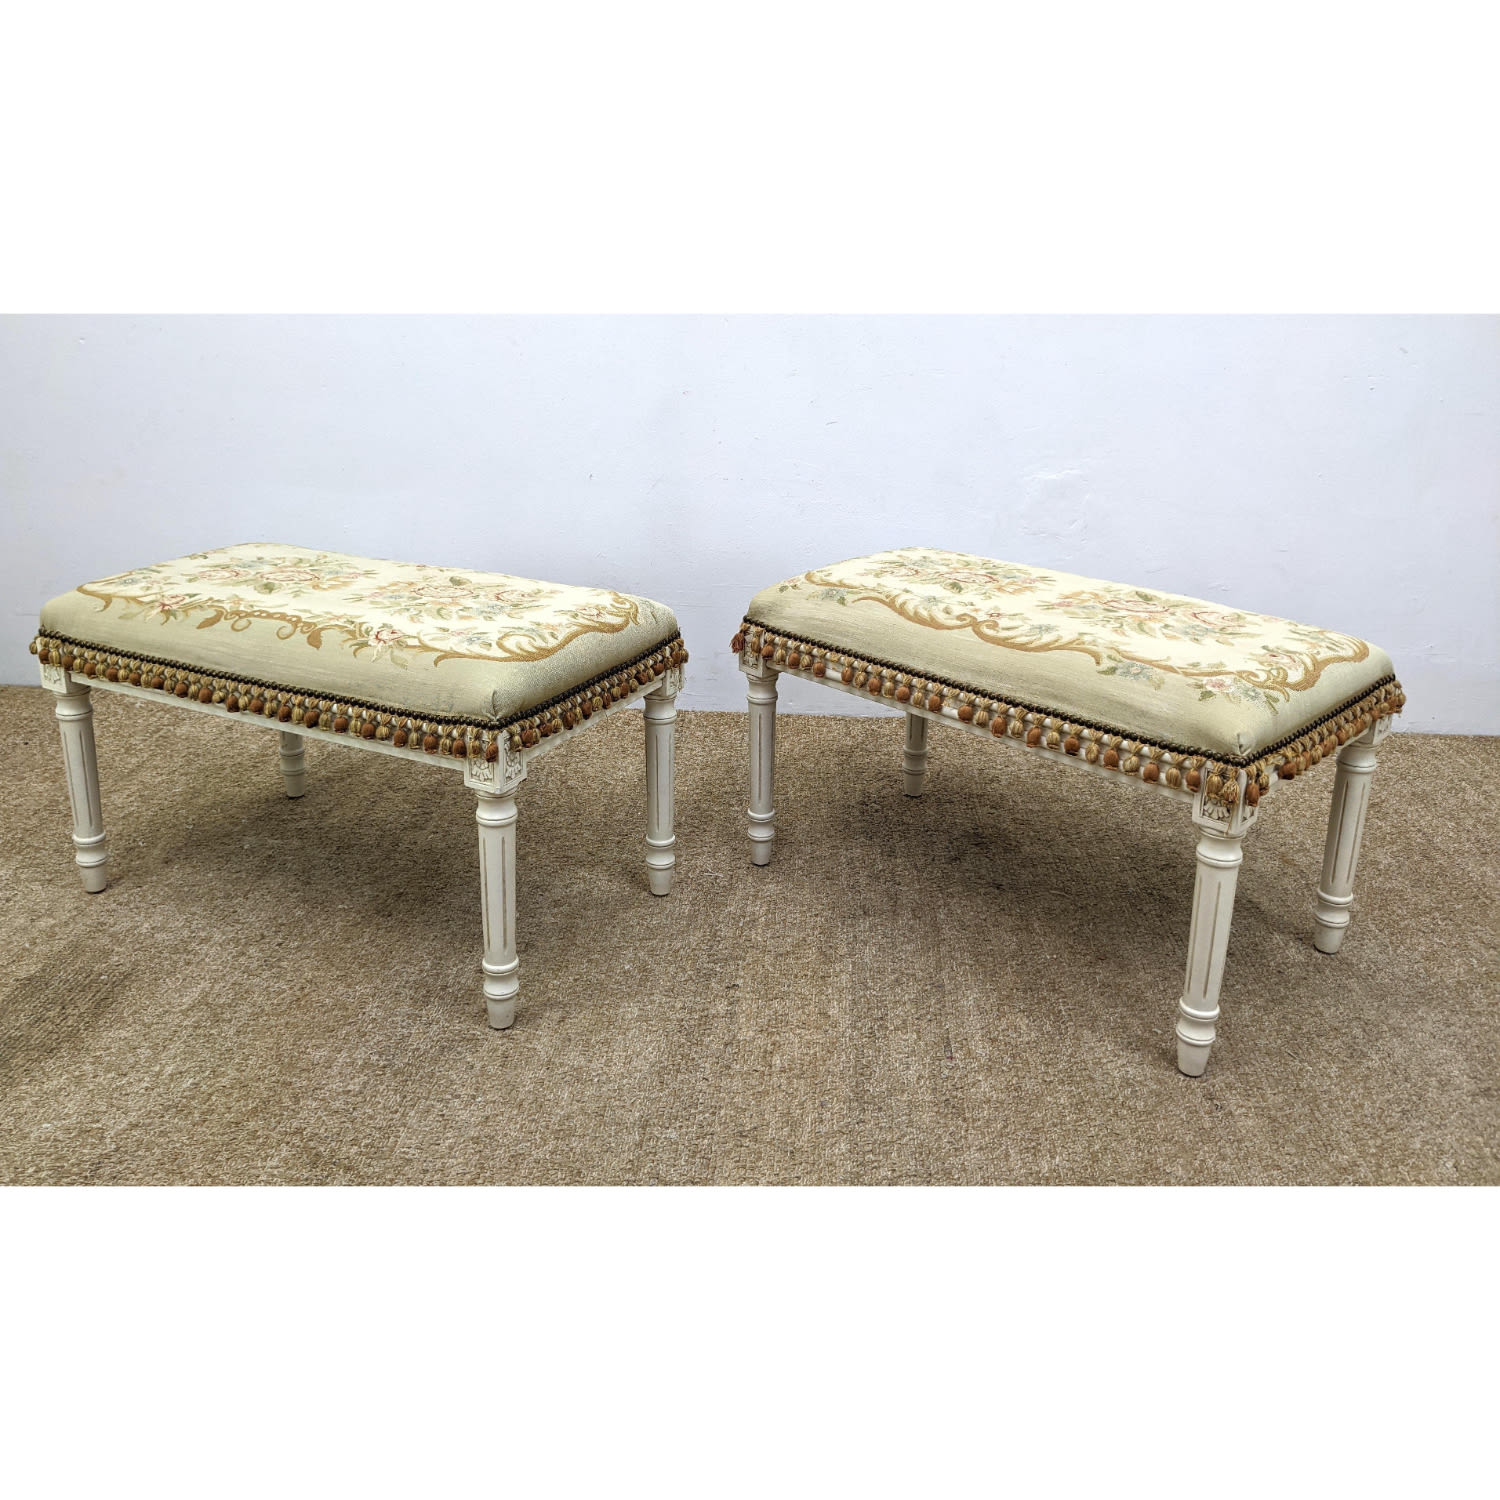 Pr Aubusson style upholstered benches  2b92a6